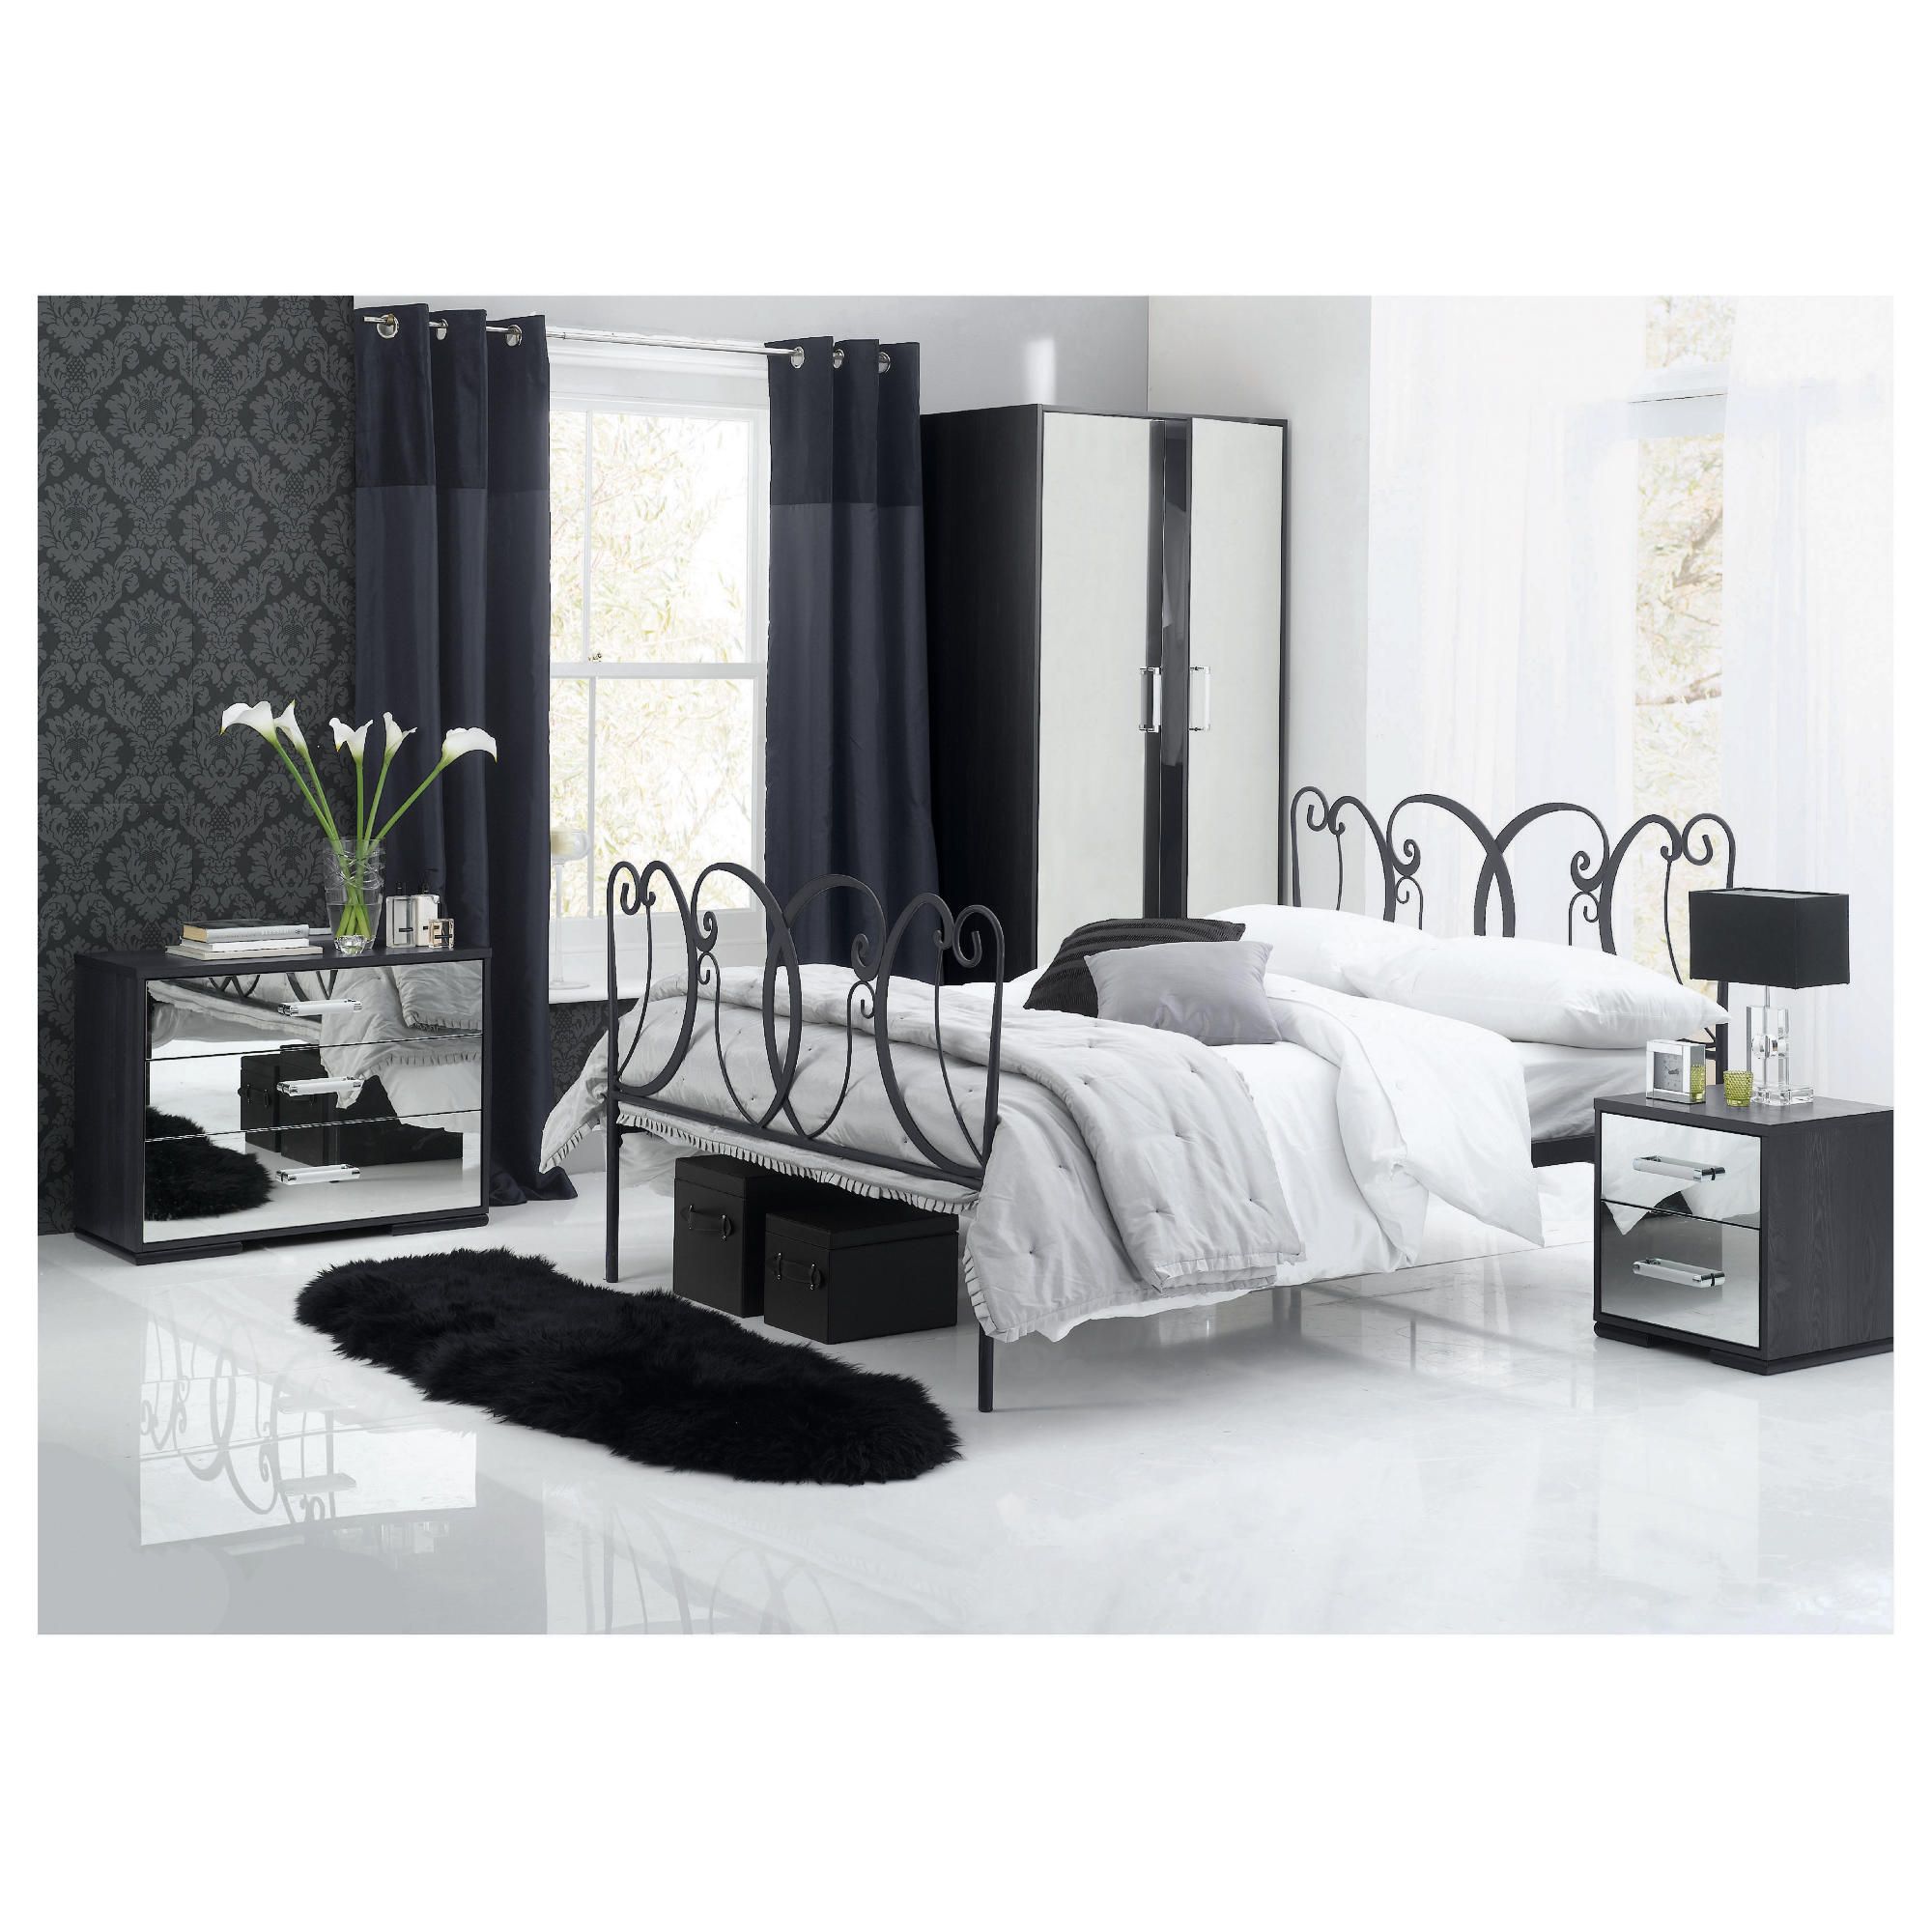 Sophia 2 Dr Robe 3 Drw & Bedside Chest Set Mirrored at Tesco Direct